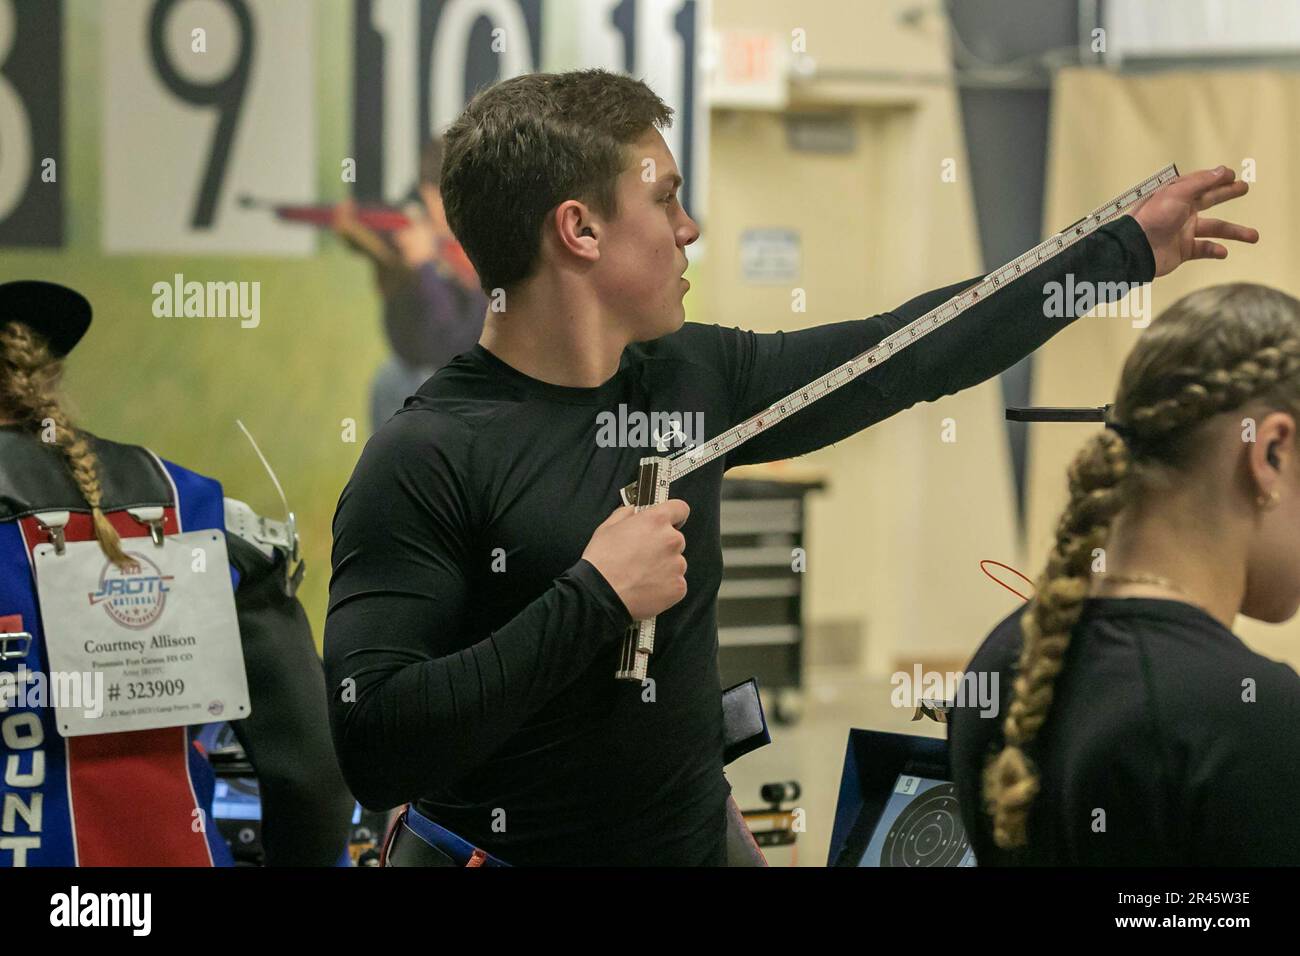 Caden Cavanaugh, an Army JROTC Cadet from Fountain-Fort Carson High School, uses a measuring tool to help establish his stance during the 2023 JROTC National Air Rifle Championship on March 25 at Camp Perry, Ohio. The competition is held March 23-25 and features the best marksmen from all-service JROTC programs across the country competing in sporter and precision shooting events. | Photo by Sarah Windmueller, U.S. Army Cadet Command Public Affairs Stock Photo